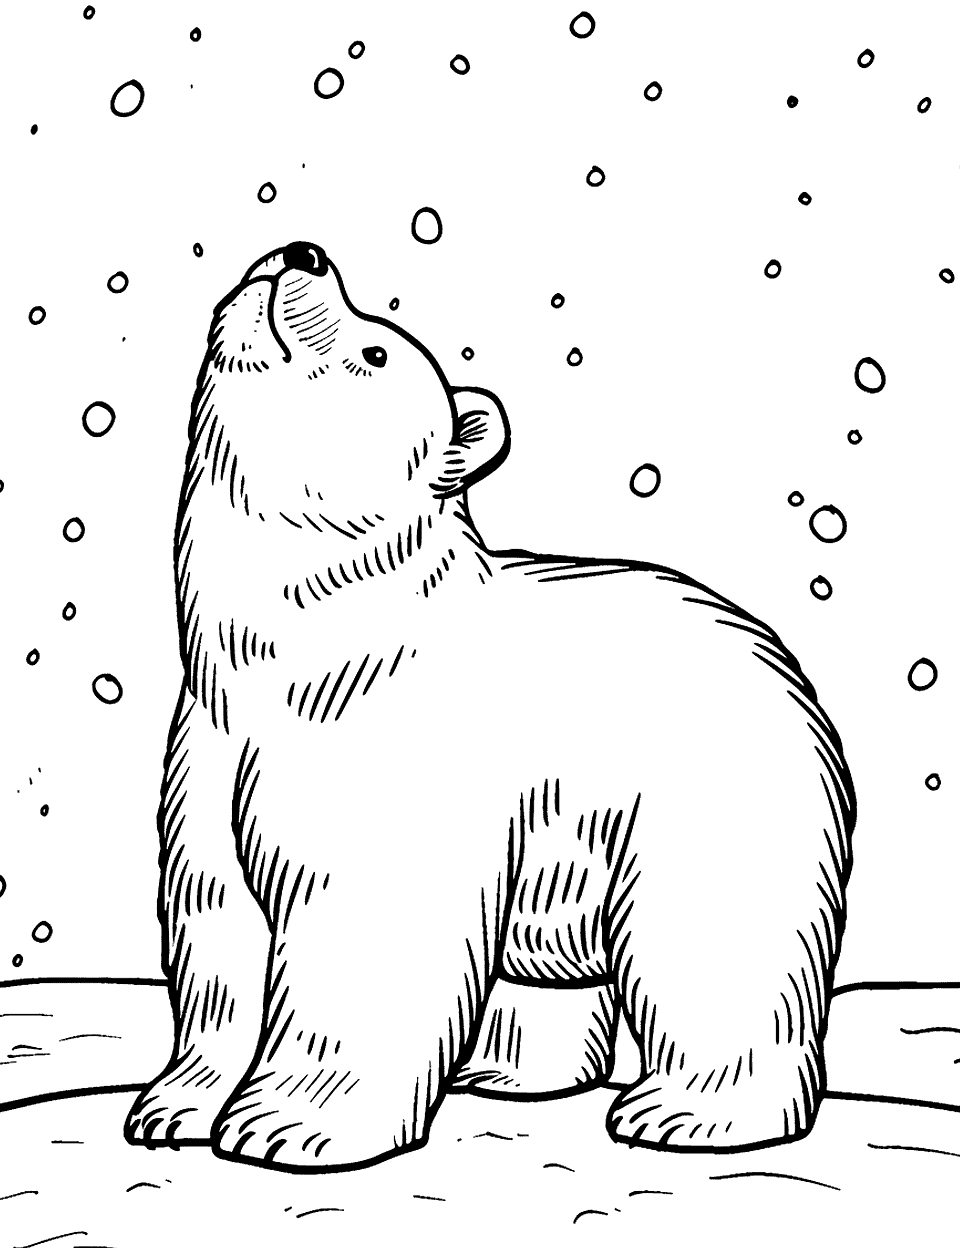 Young Polar Bear in Snow Coloring Page - A young polar bear curiously looking at falling snowflakes.